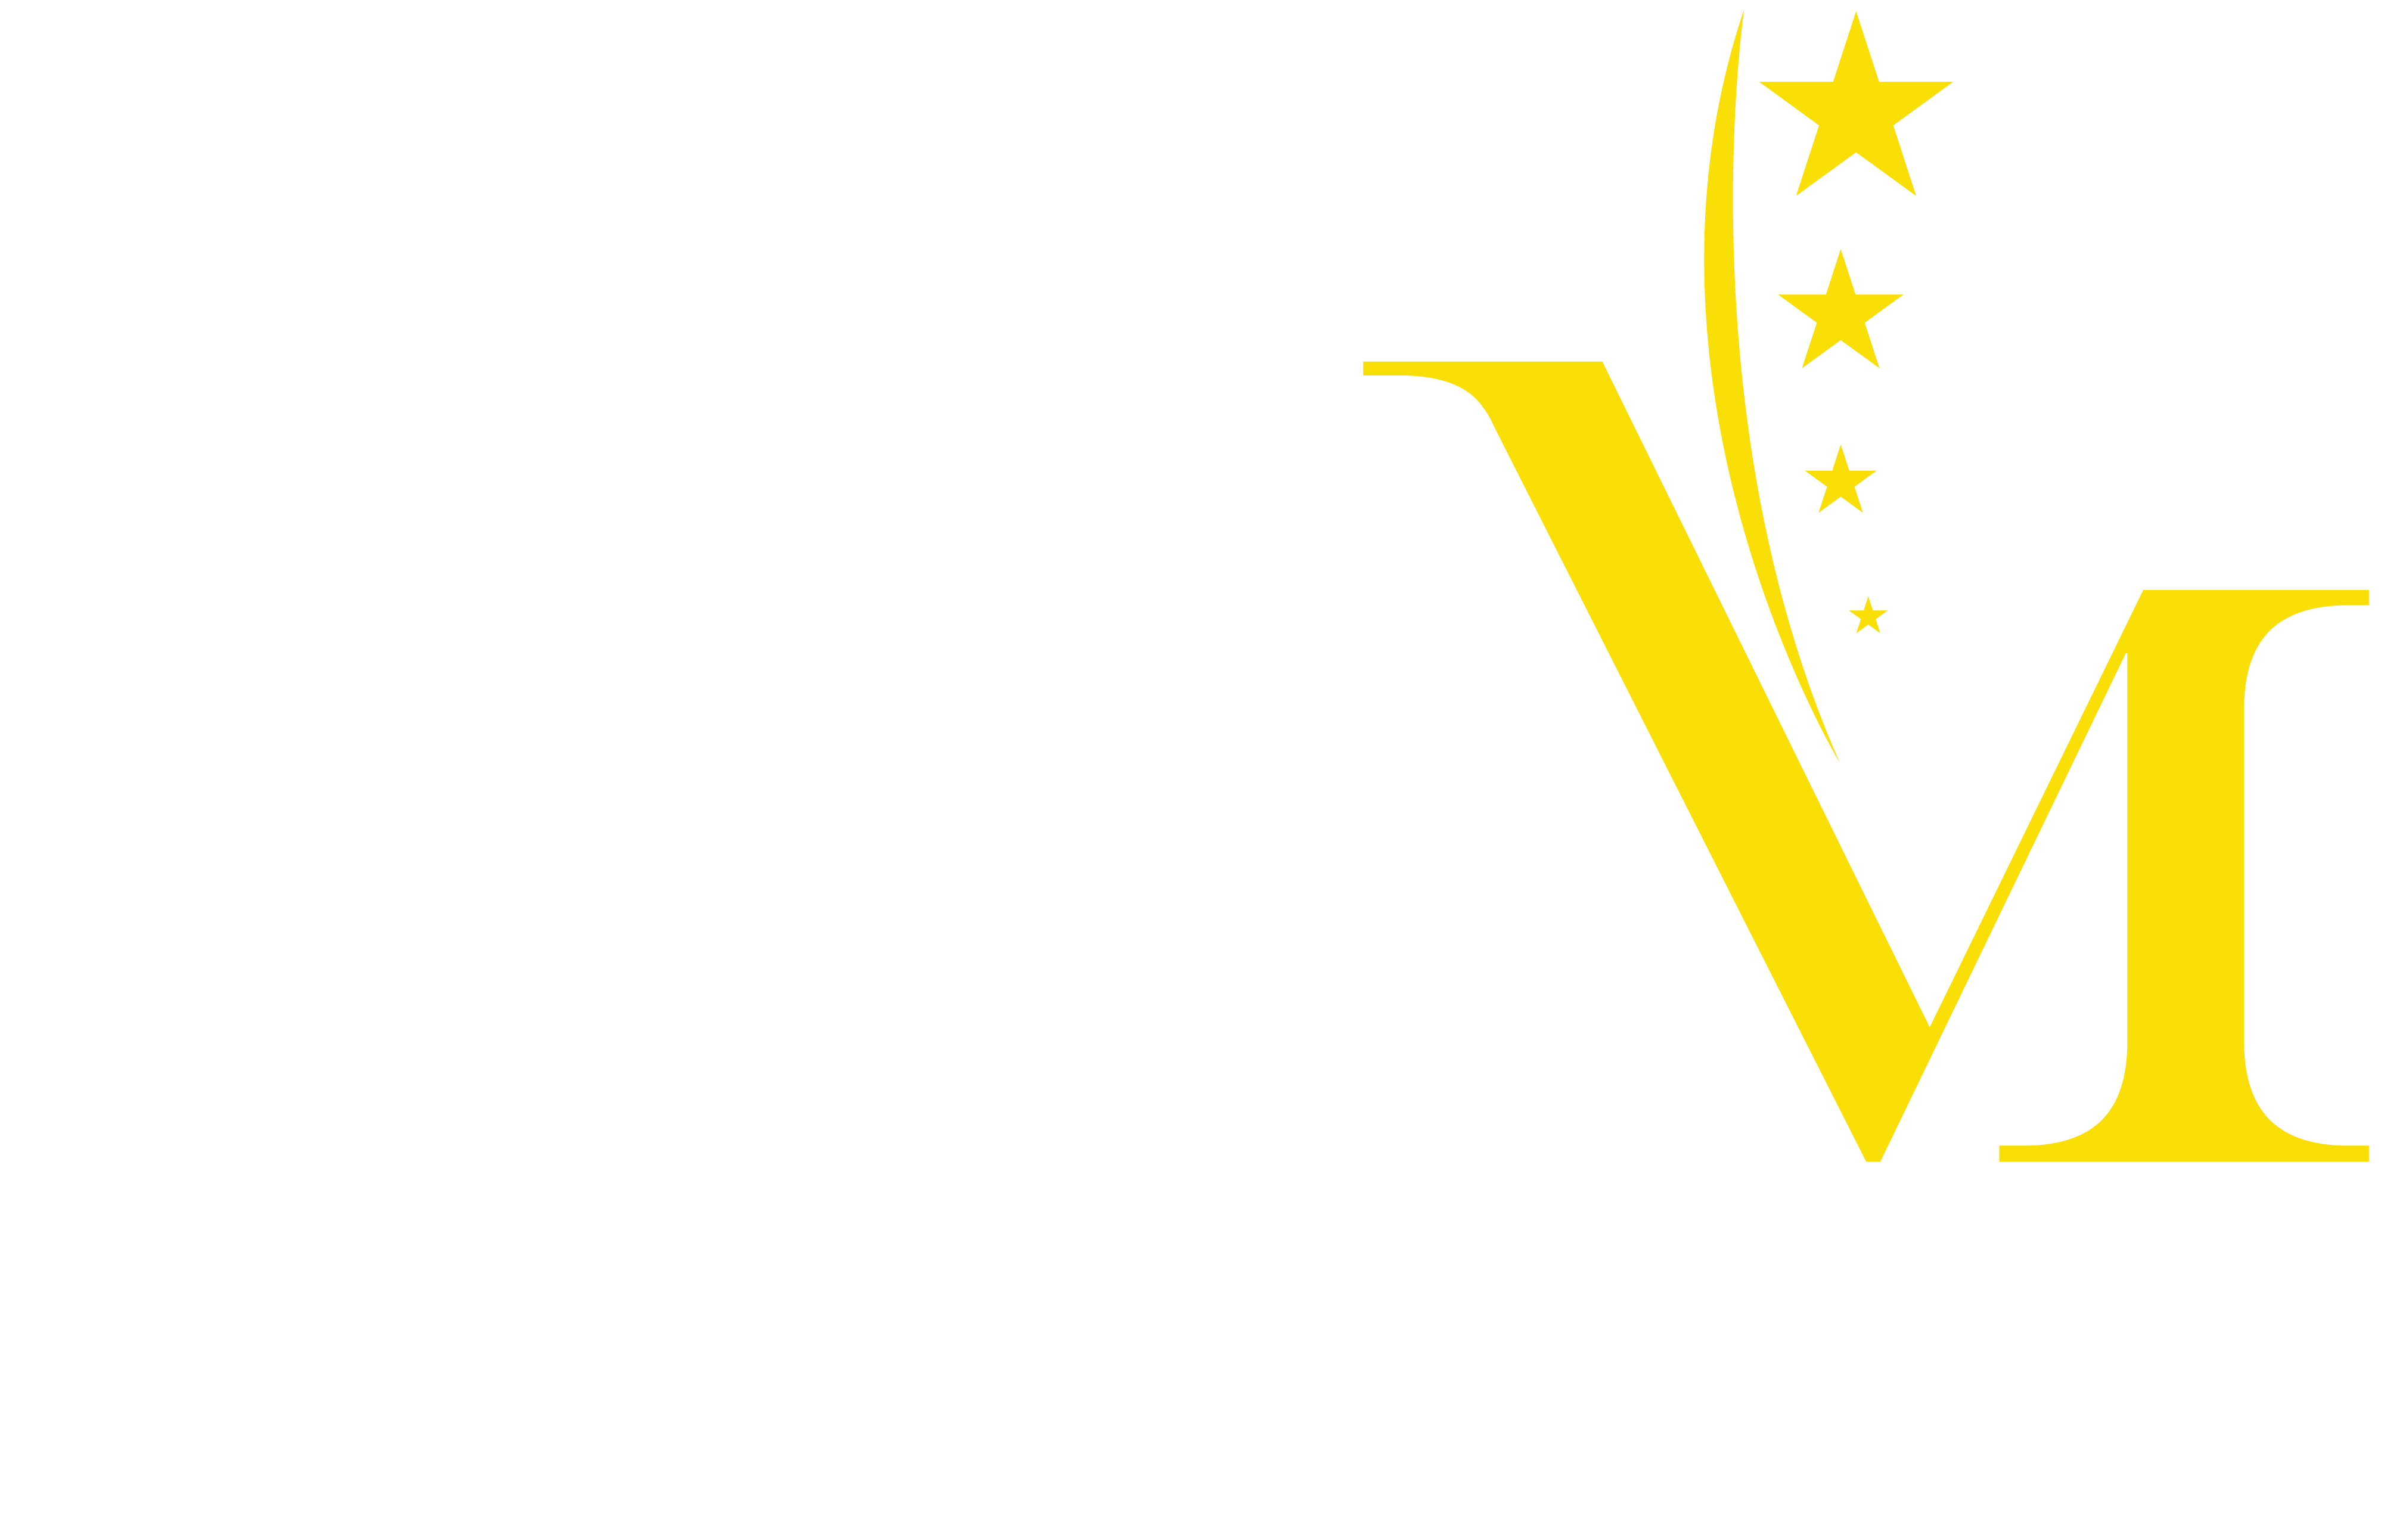 GPM Logo - GPM – Sharing Knowledge & Expertise